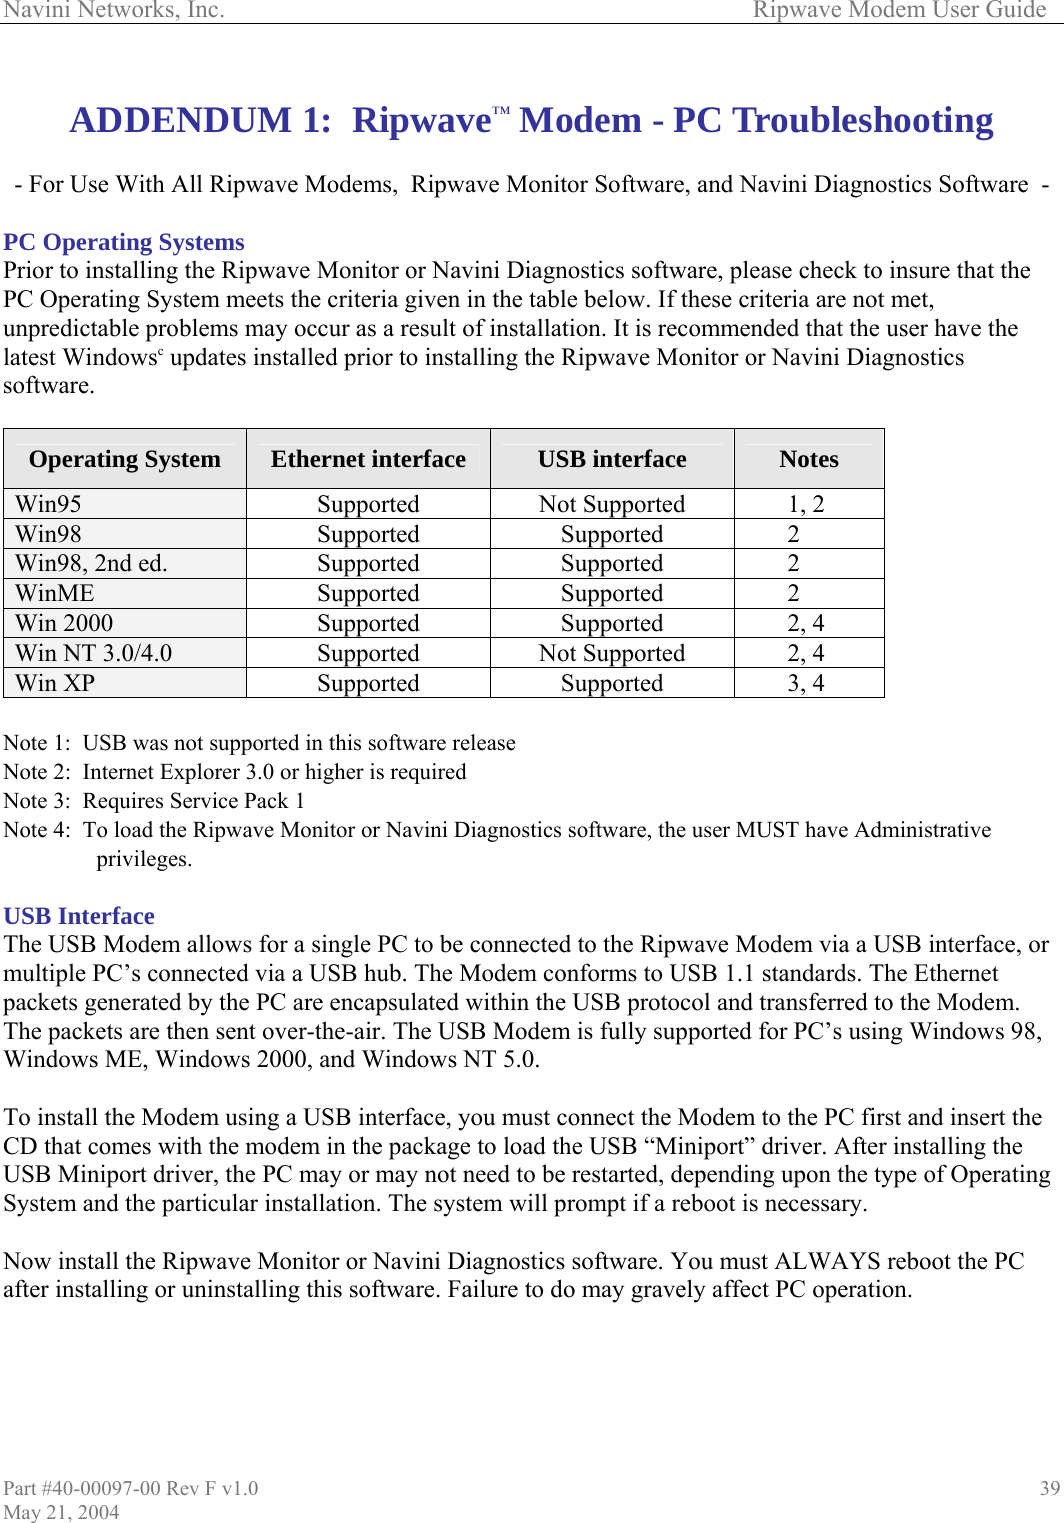 Navini Networks, Inc.        Ripwave Modem User Guide  ADDENDUM  ooting - For Use With All Ripwave ware  - C Operating Systems rior to installing the Ripwav hat the C Operating System meets tnpredictable problems may o cu ave the test Windowsc updates instaftware. 1:  Ripwave™ Modem - PC Troublesh  Modems,  Ripwave Monitor Software, and Navini Diagnostics Soft PP e Monitor or Navini Diagnostics software, please check to insure the criteria given in the table below. If these criteria are not met, r as a result of installation. It is recommended that the user hPu cllla ed prior to installing the Ripwave Monitor or Navini Diagnostics so Operating System  Ethernet interface  USB interface  Notes Win95  Supported  Not Supported  1, 2 Win98  Supported Supported 2 Win98, 2nd ed.  Supported Supported 2 WinME  Supported Supported 2 Win 2000  Supported Supported 2, 4 Win NT 3.0/4.0  Supported  Not Supported  2, 4 Win XP  Supported Supported 3, 4  Note 1:  USB was not supported in tote 2:  Internet Explorer 3.0 or higote 3:  Requires Service Pack 1 ote 4:  To load the Ripwave M e privileges. SB Interface he USB Modem allows for a single PC to be connected to the Ripwave Modem via a USB interface, or ultiple PC’s connected via a USB hub. The Modem conforms to USB 1.1 standards. The Ethernet  PC a e encapsulated within the USB protocol and transferred to the Modem. t ove ows 98, , Windows 2000o install the Modem using a insert the D that comes with the mode g the SB Miniport driver, the PC  e type of Operating ystem and the particular installation. The system will prompt if a reboot is necessary.  ow install the Ripwave Mon the PC fter installing or uninstalling n.  his software release her is required NNN onitor or Navini Diagnostics software, the user MUST have Administrativ UTmpackets generated by theThe packets are then senWindows MErr-the-air. The USB Modem is fully supported for PC’s using Wind, and Windows NT 5.0.  USB interface, you must connect the Modem to the PC first and m in the package to load the USB “Miniport” driver. After installinmay or may not need to be restarted, depending upon th TCUS N itor or Navini Diagnostics software. You must ALWAYS reboot  this software. Failure to do may gravely affect PC operatioa   Part #40-00097-00 Rev F v1.0 May 21, 2004 39